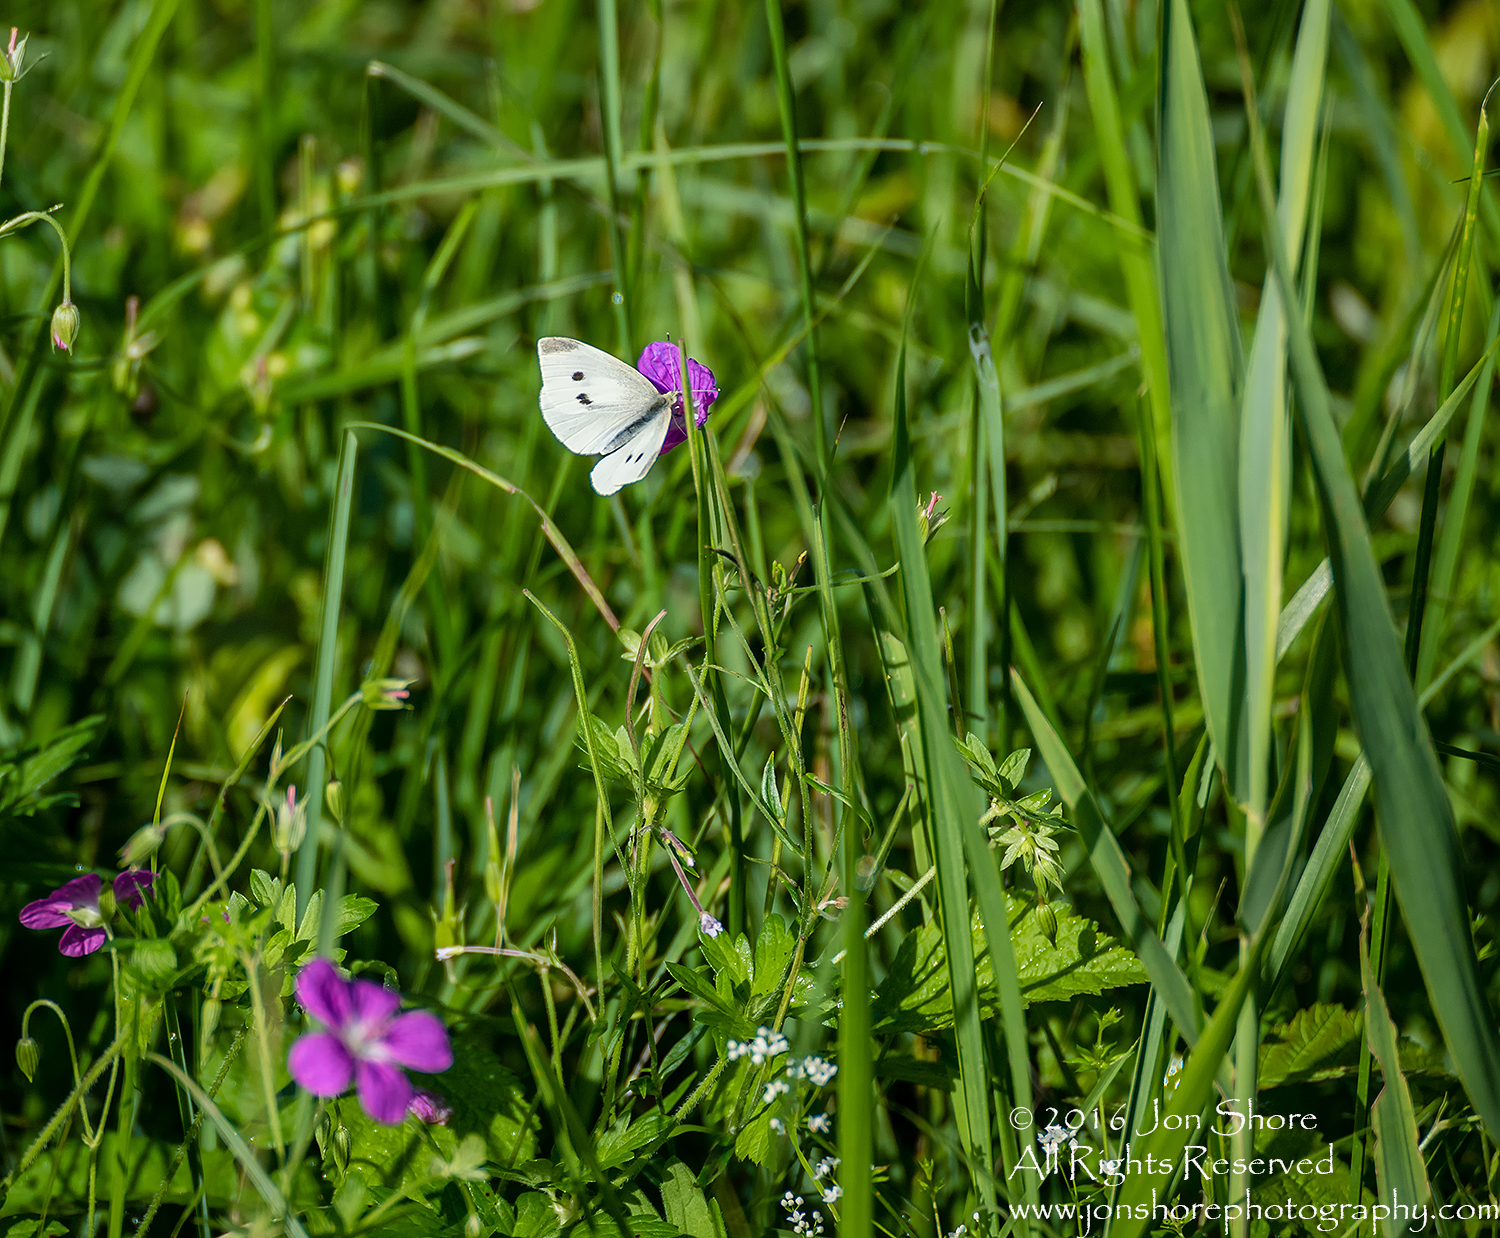 Butterfly on flower Latgale. Tamron 300mm